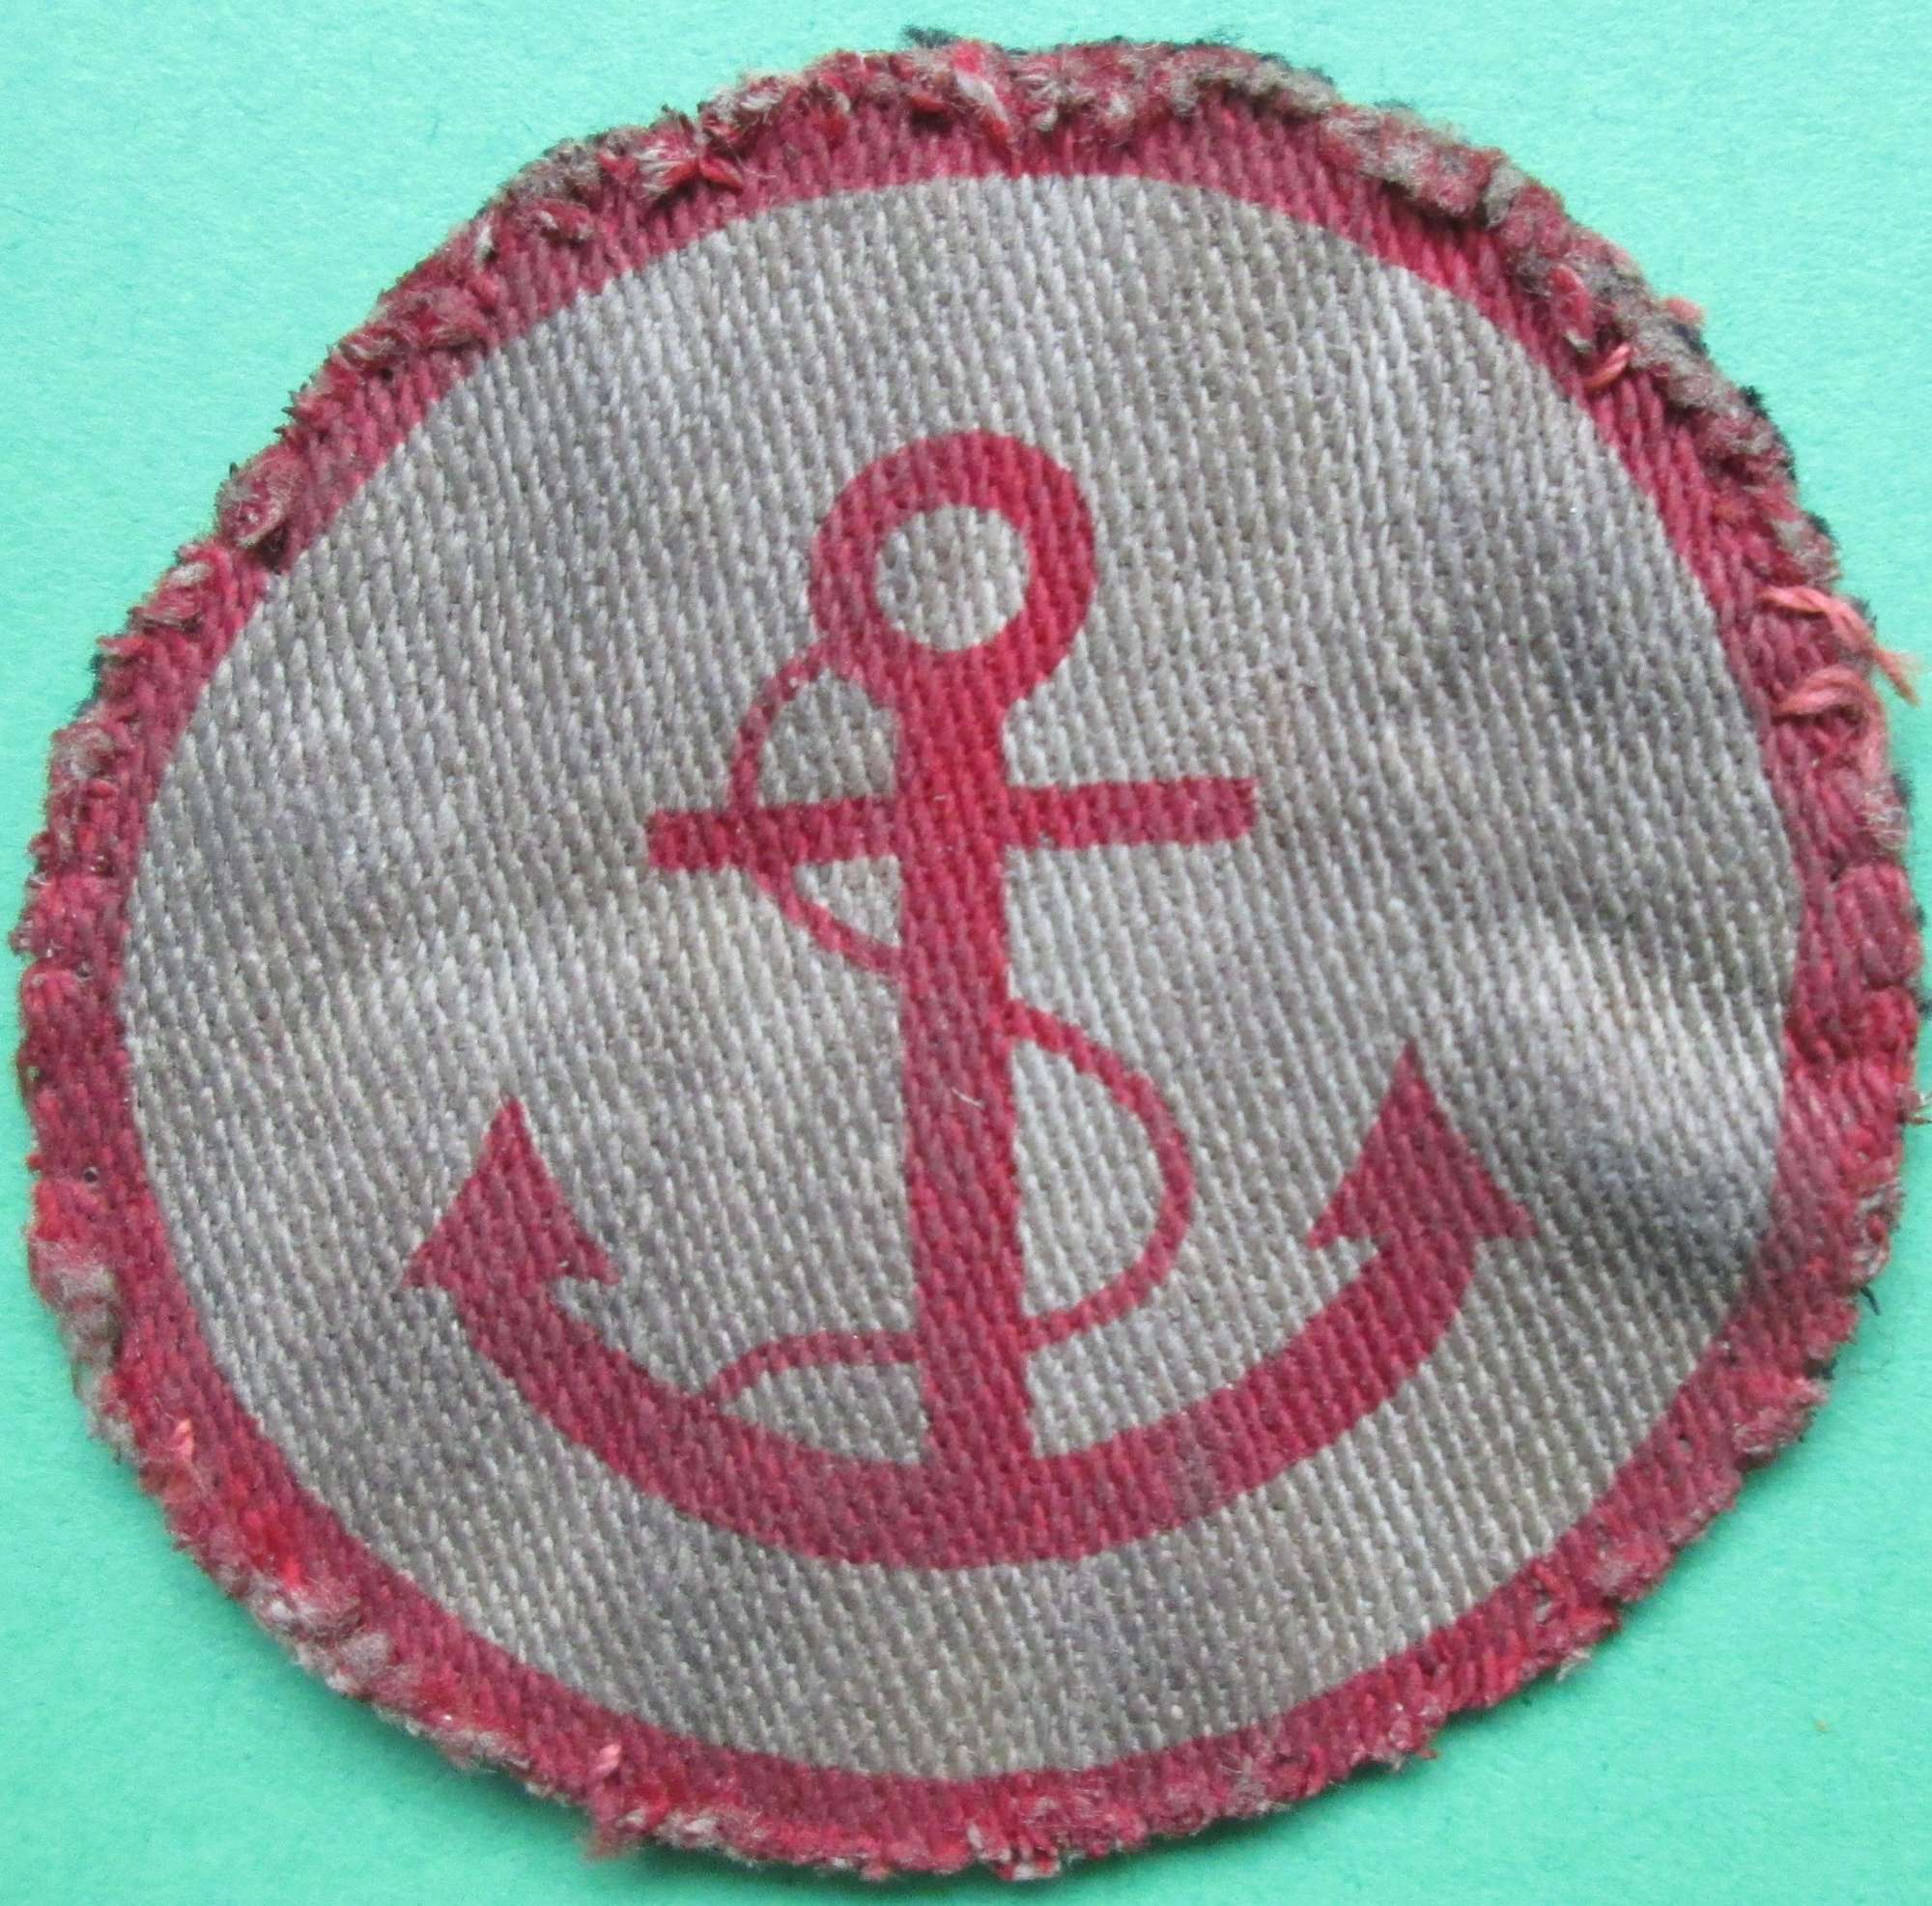 A BEACH GROUPS FORMATION PATCH